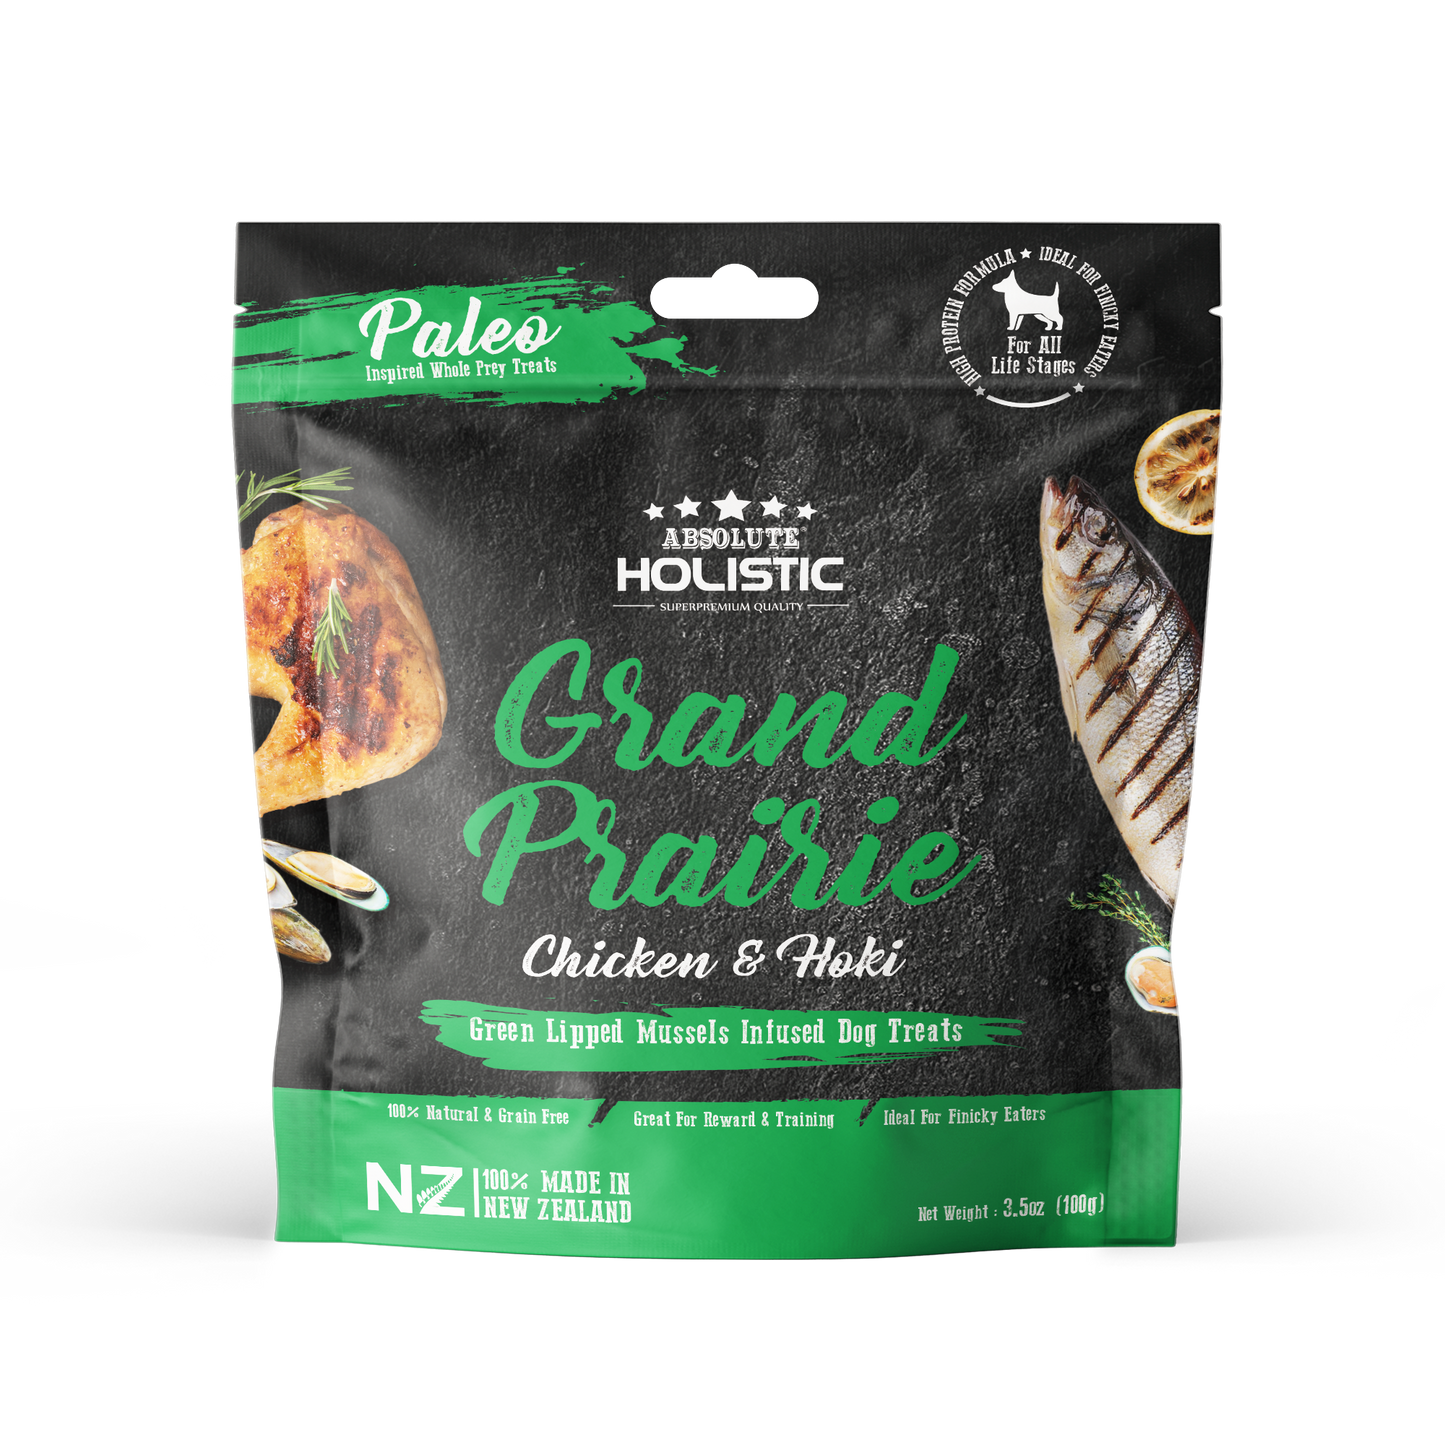 [3 for $3.60 OFF] Absolute Holistic Air Dried Chicken & Hoki Dog Treats 100g